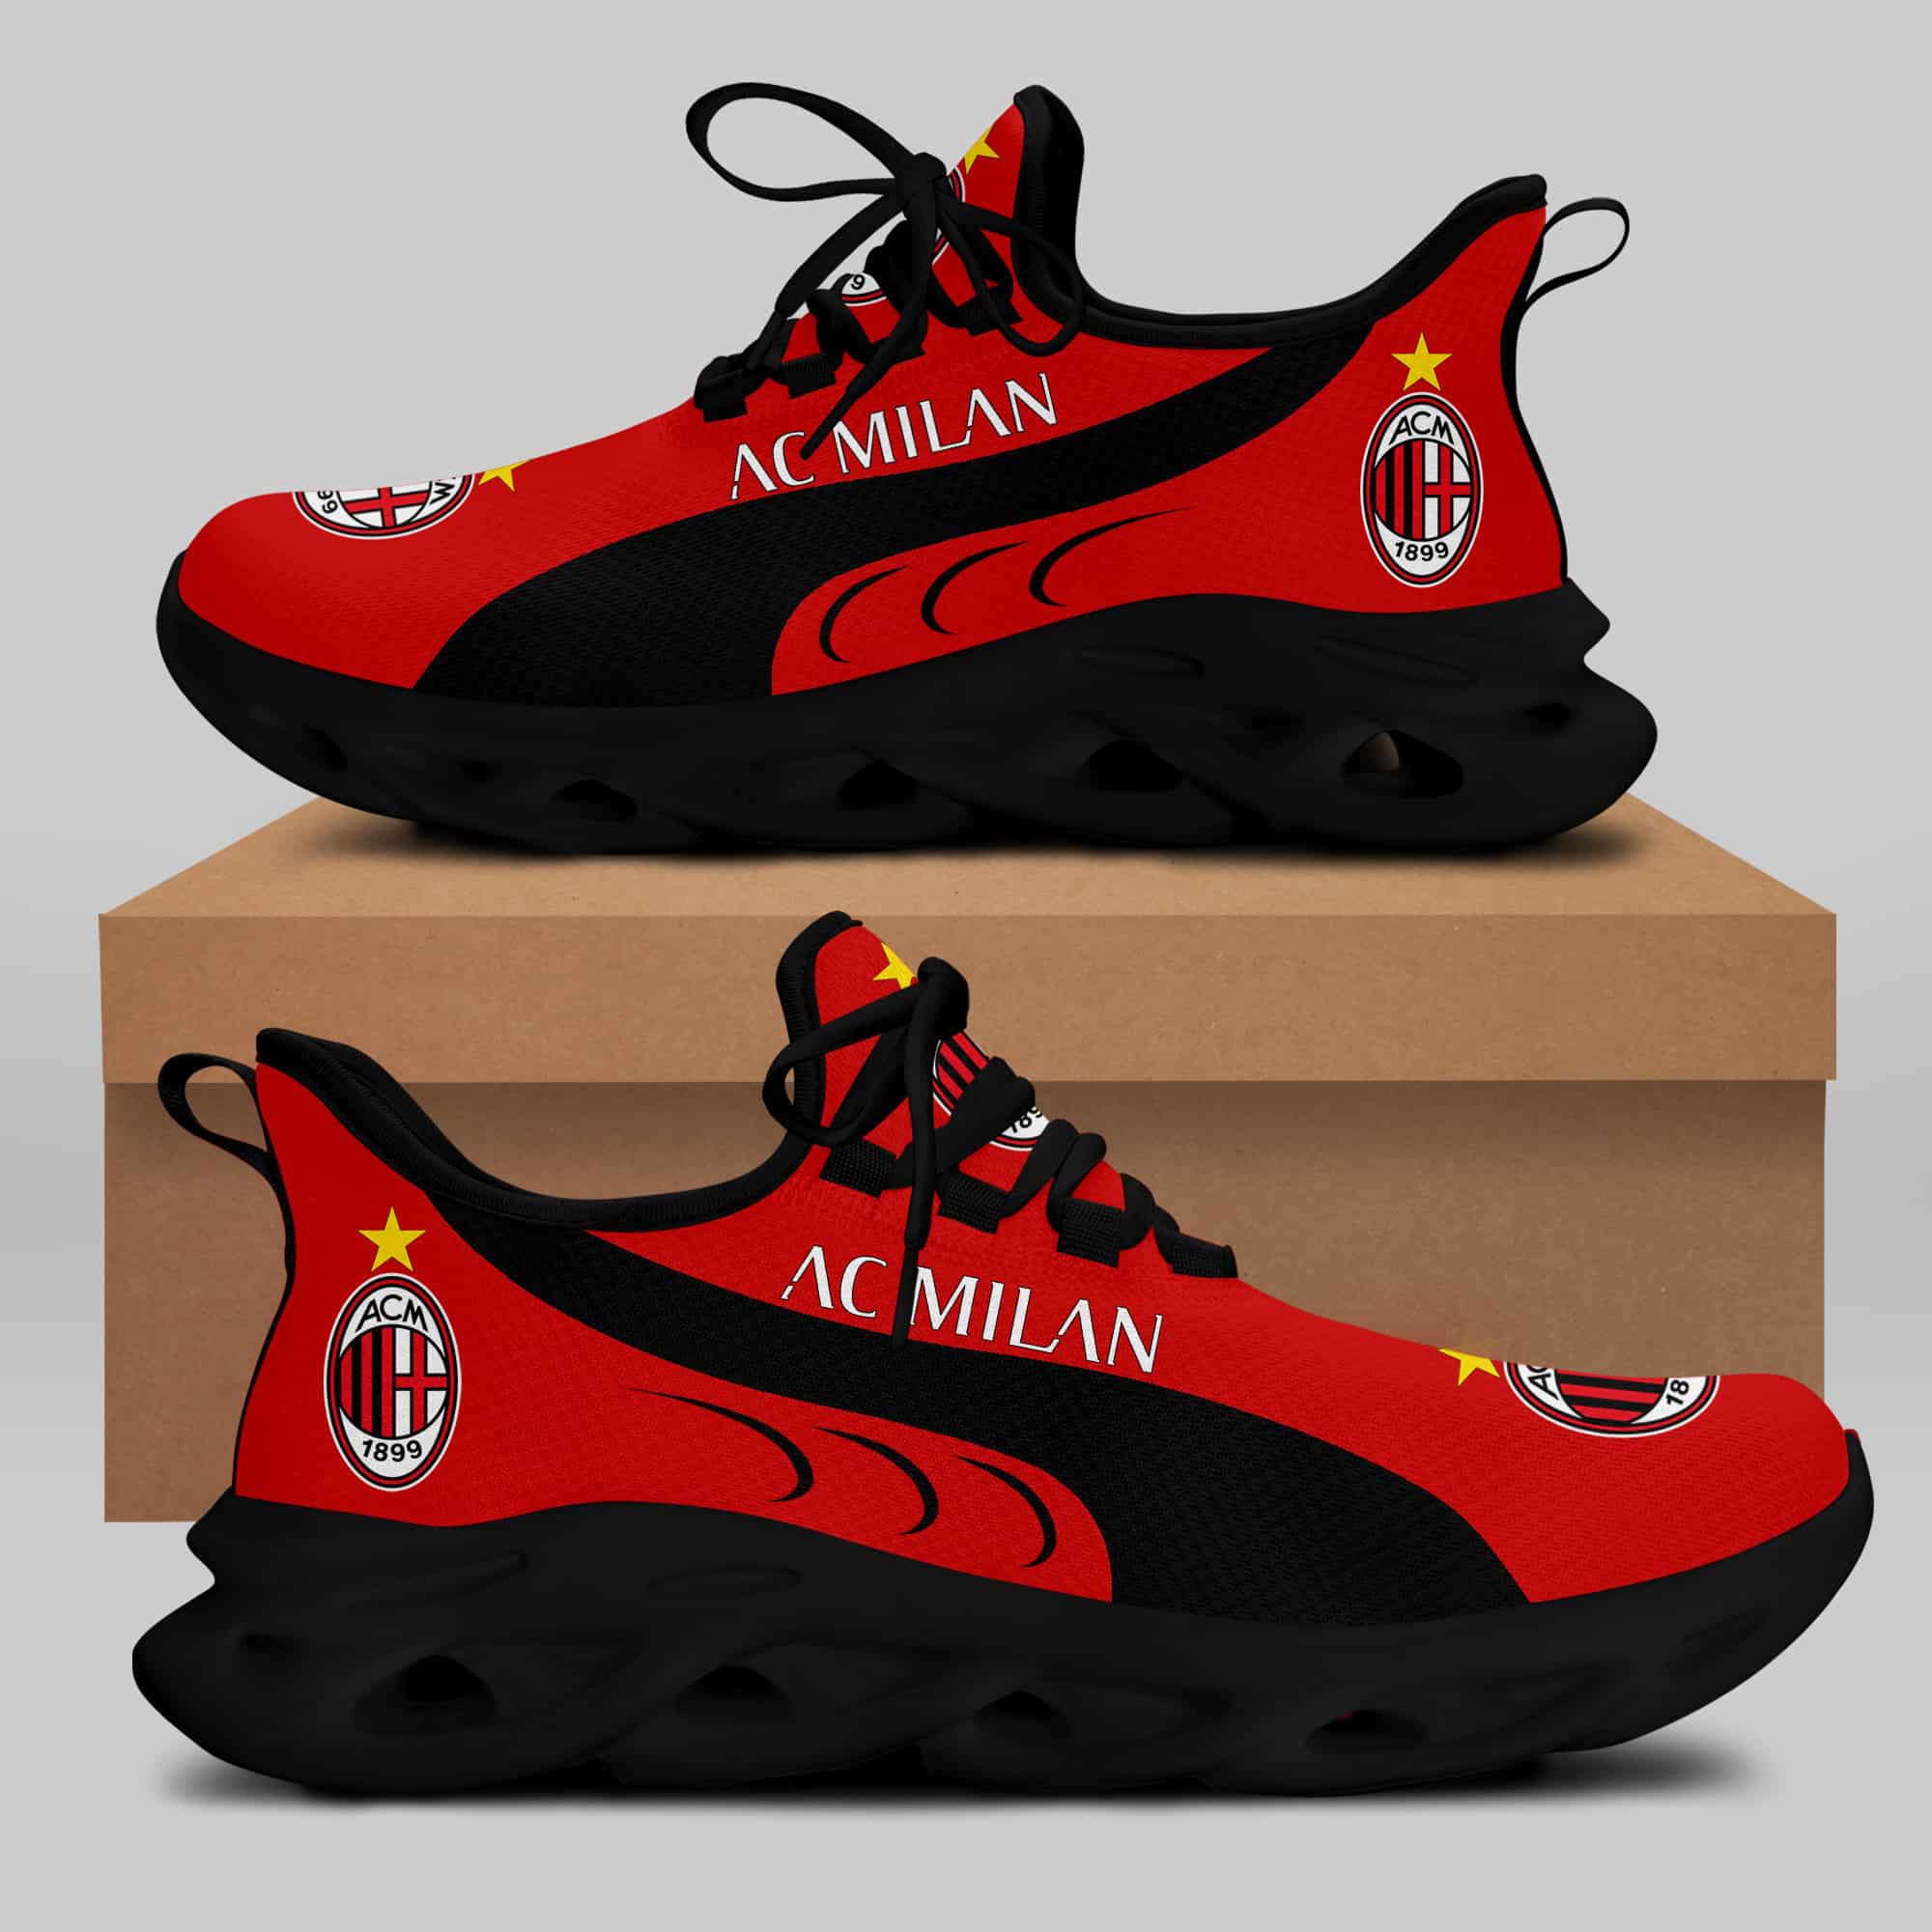 Ac Milan Running Shoes Max Soul Shoes Sneakers Ver 3 1